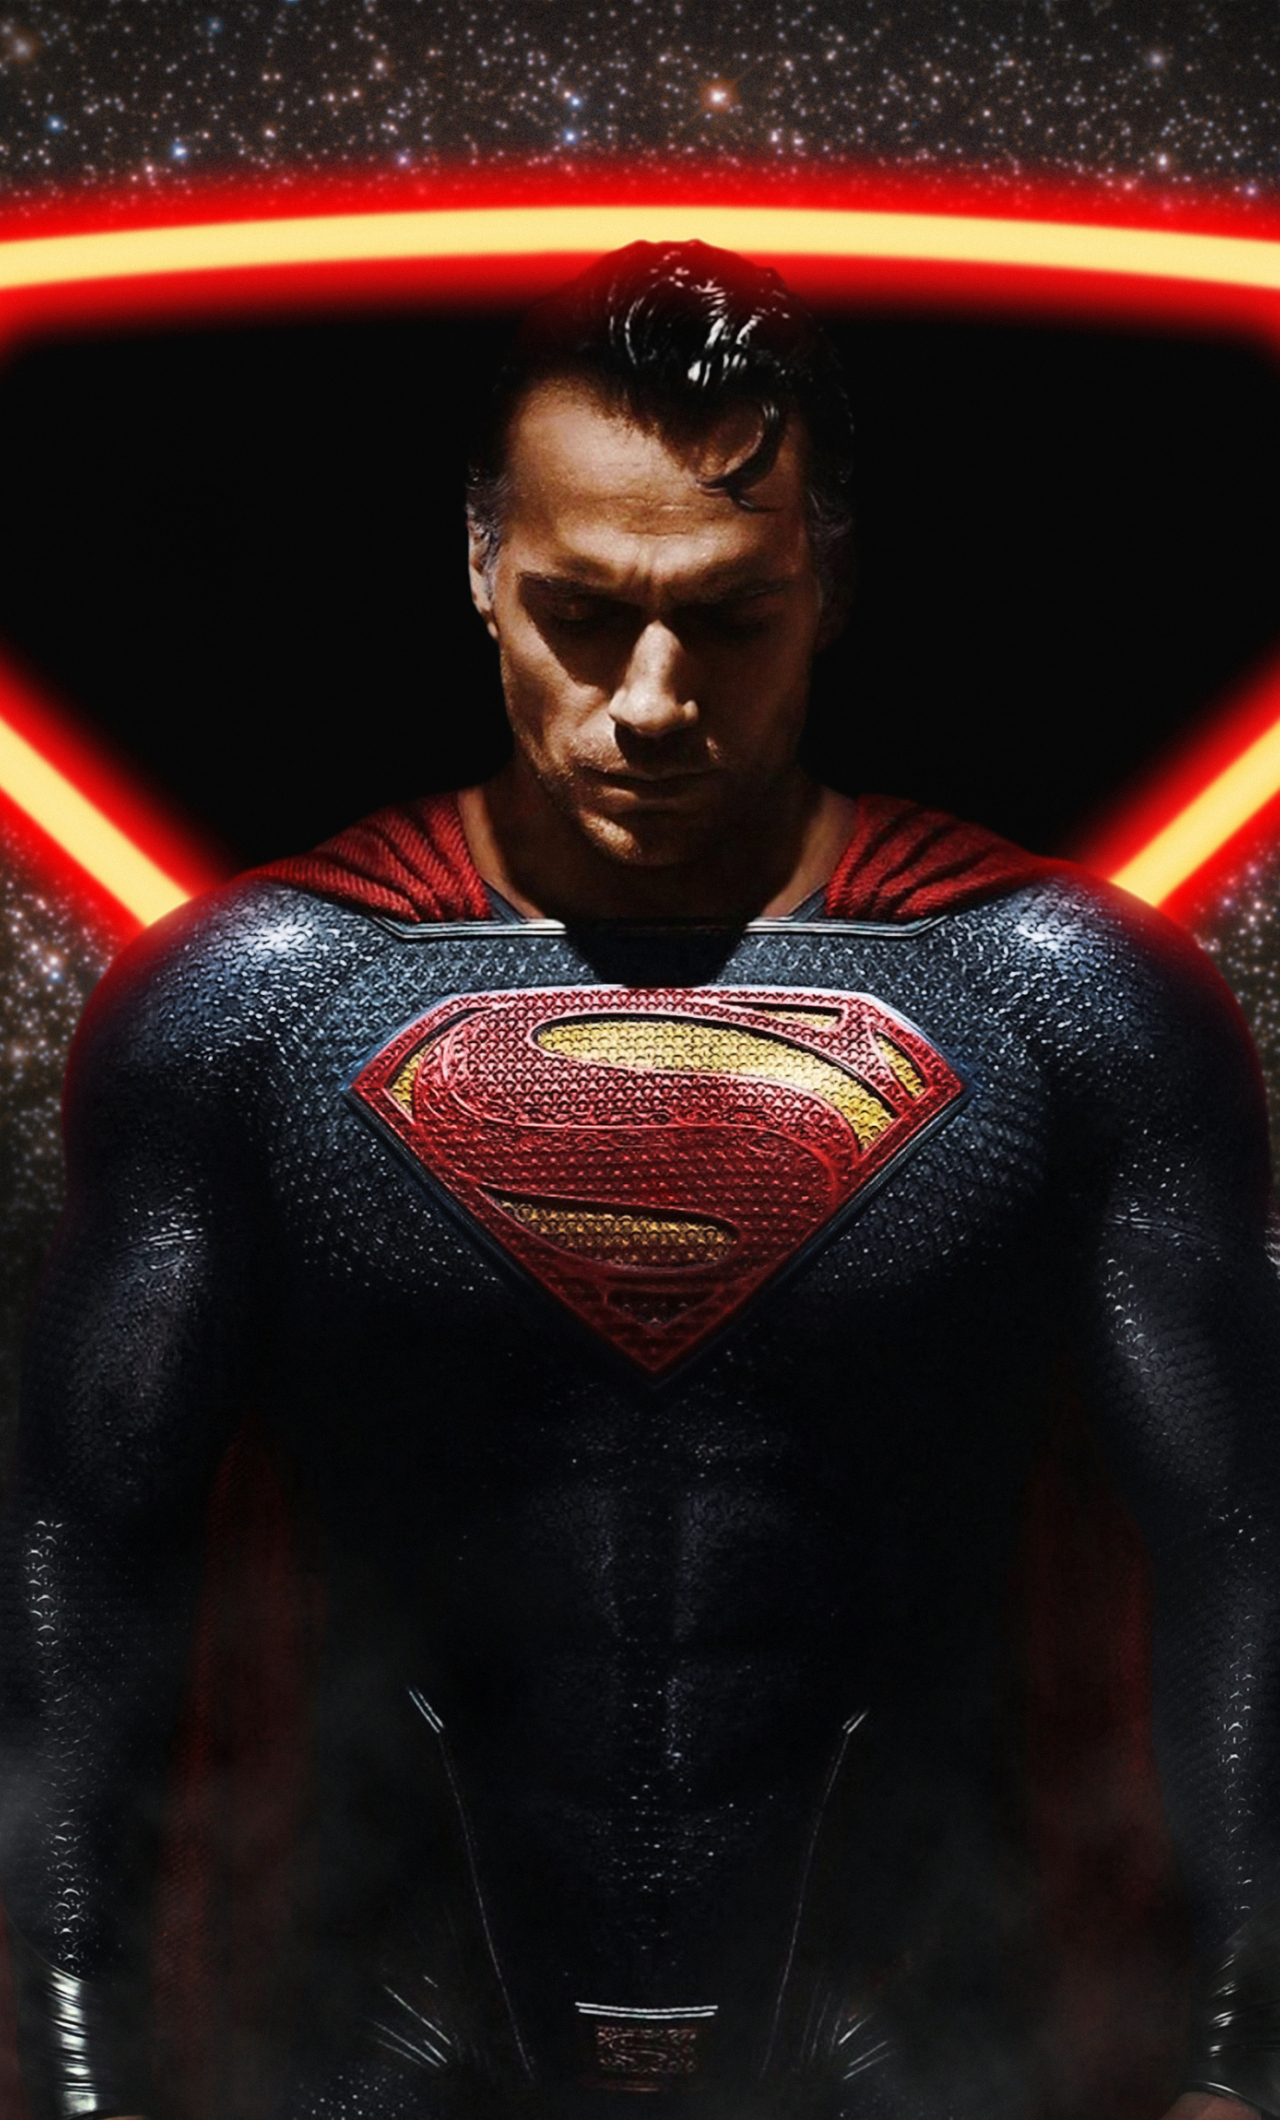 Download wallpaper 1280x2120 henry cavill, man of steel, movie, superman, iphone  6 plus, 1280x2120 hd background, 23909